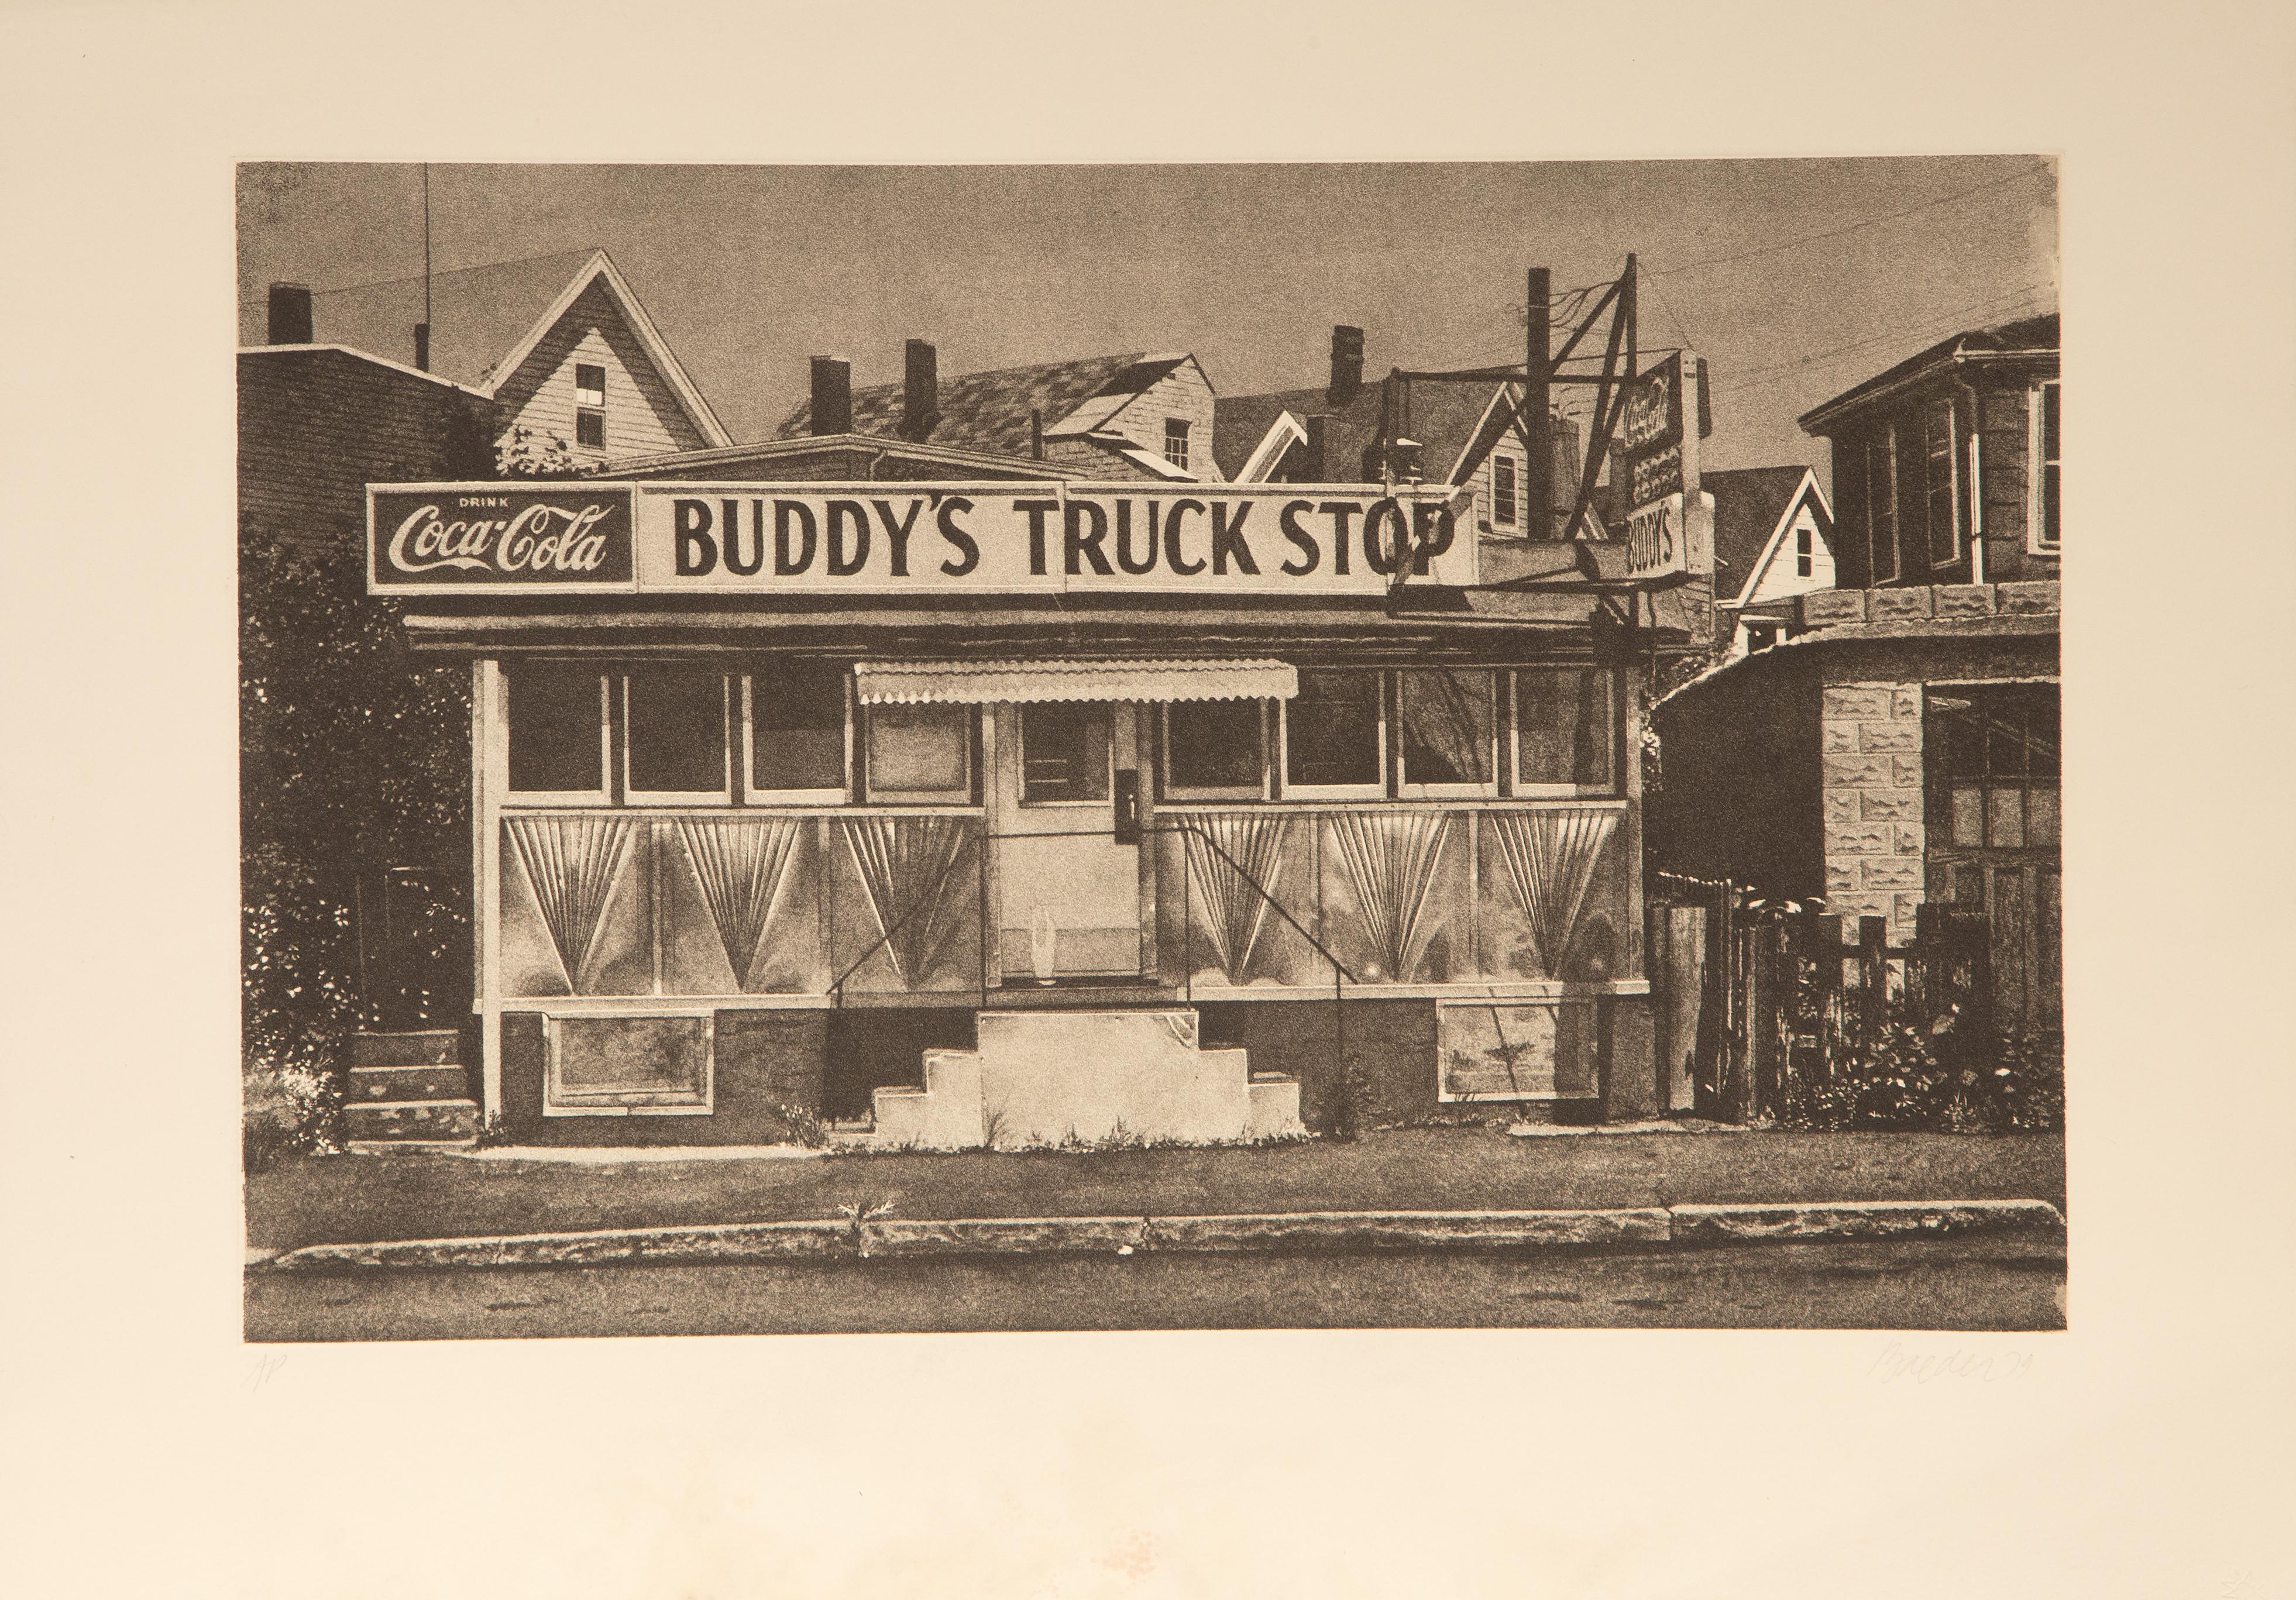 Buddy’s Truck Stop
John Baeder, American (1938)
Date: 1979
Etching on Arches, signed, numbered and dated in pencil
Edition of AP
Image Size: 15.25 x 23.75 inches
Size: 21 x 30 in. (53.34 x 76.2 cm)